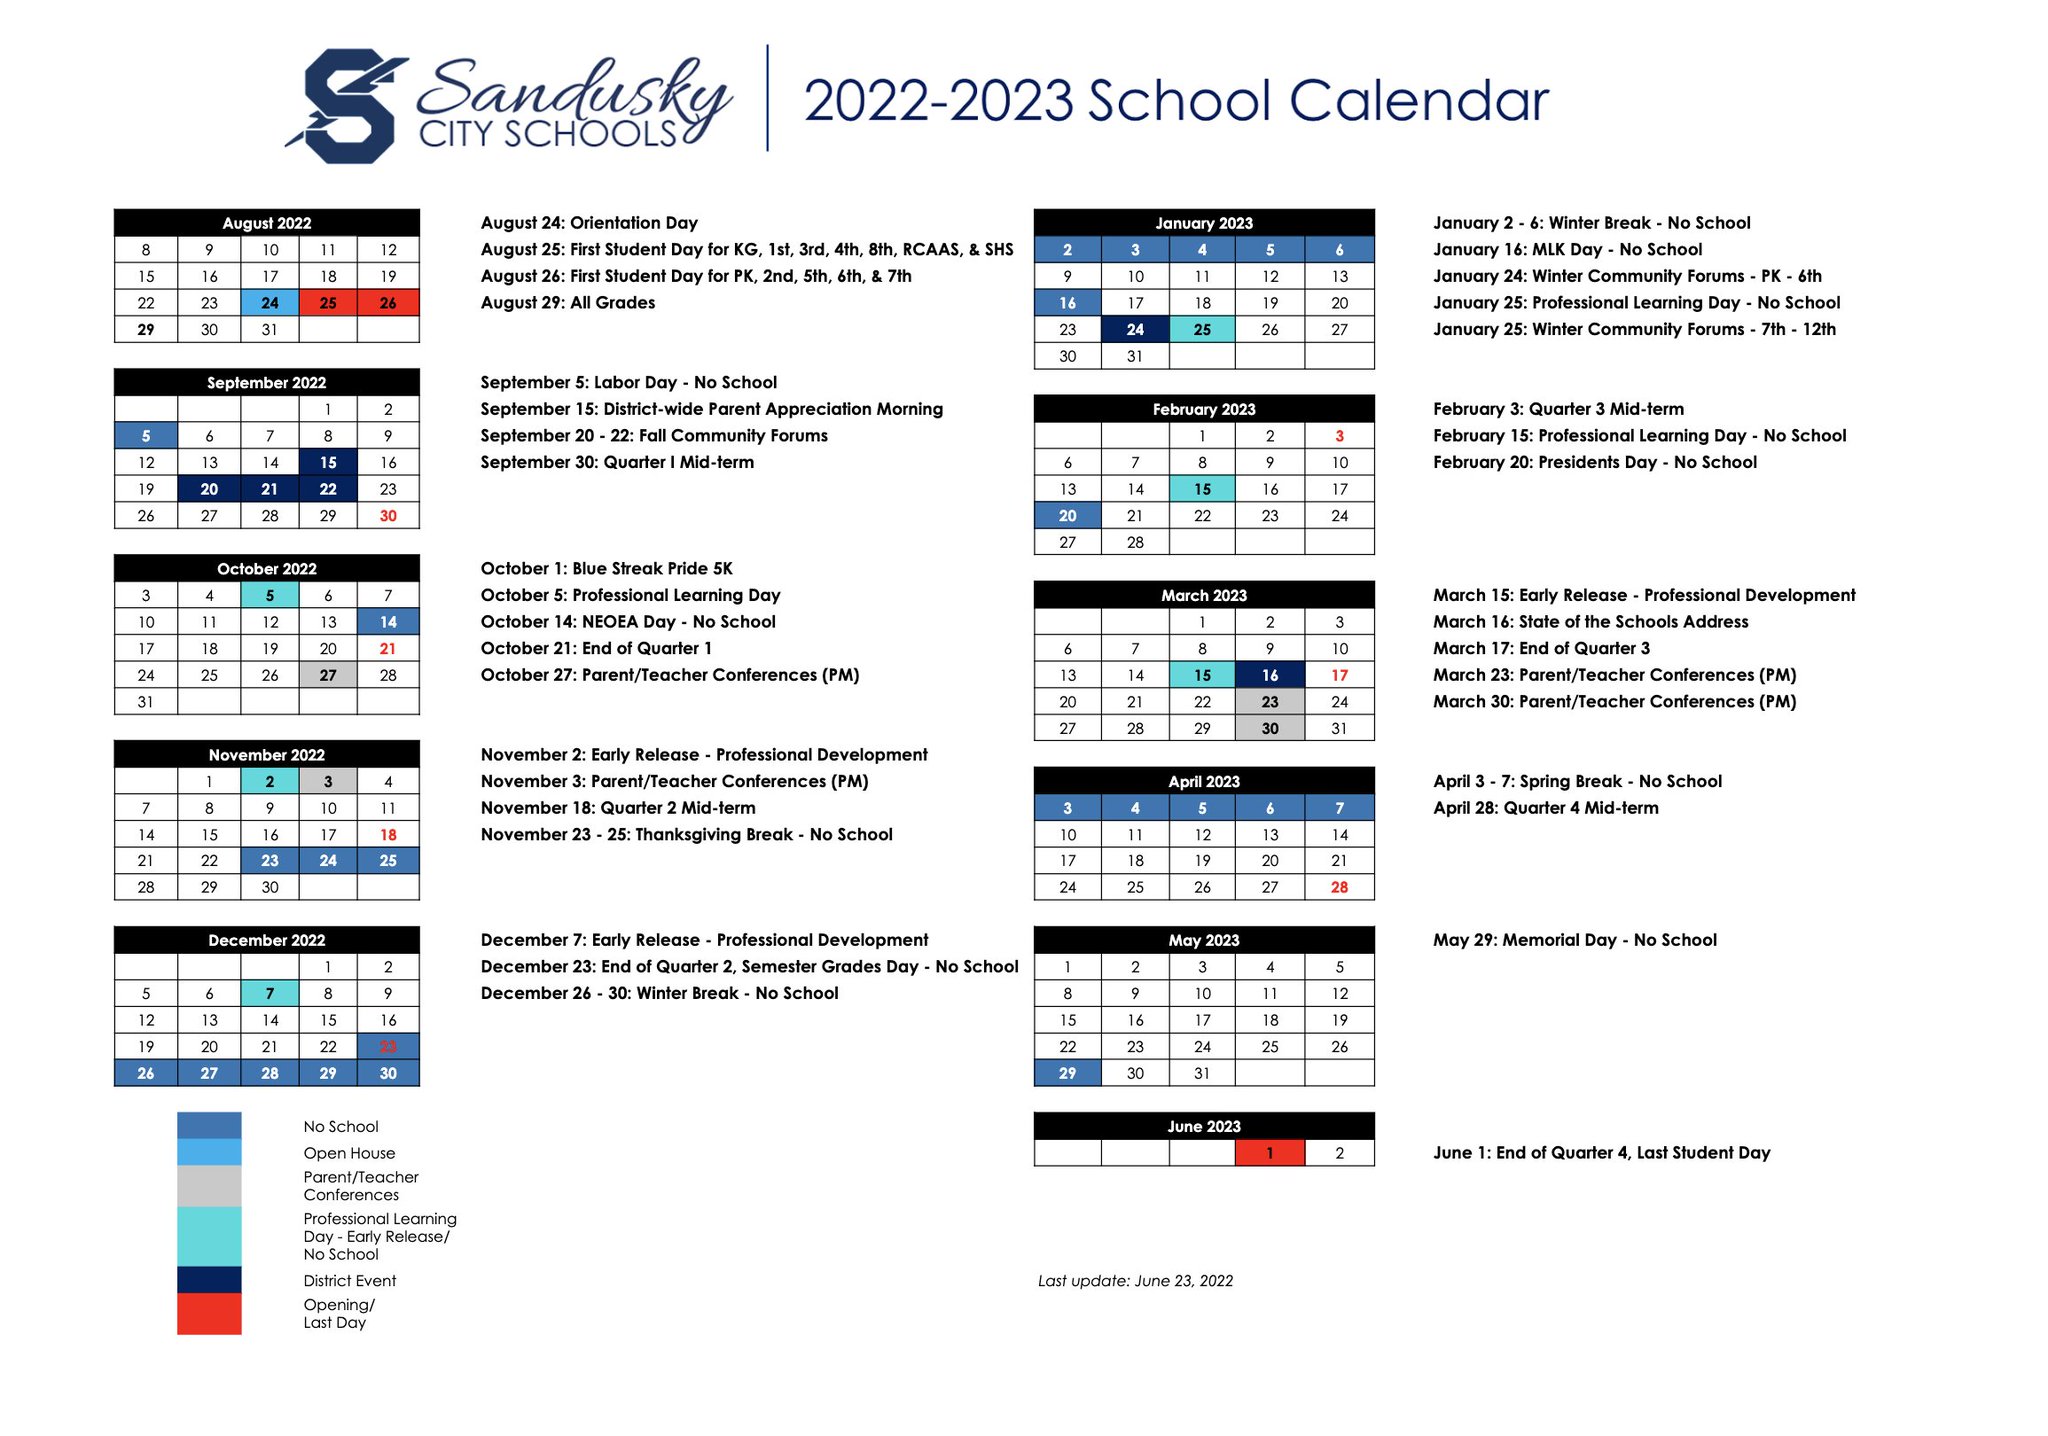 sandusky-schools-on-twitter-there-are-so-many-important-dates-to-remember-each-school-year